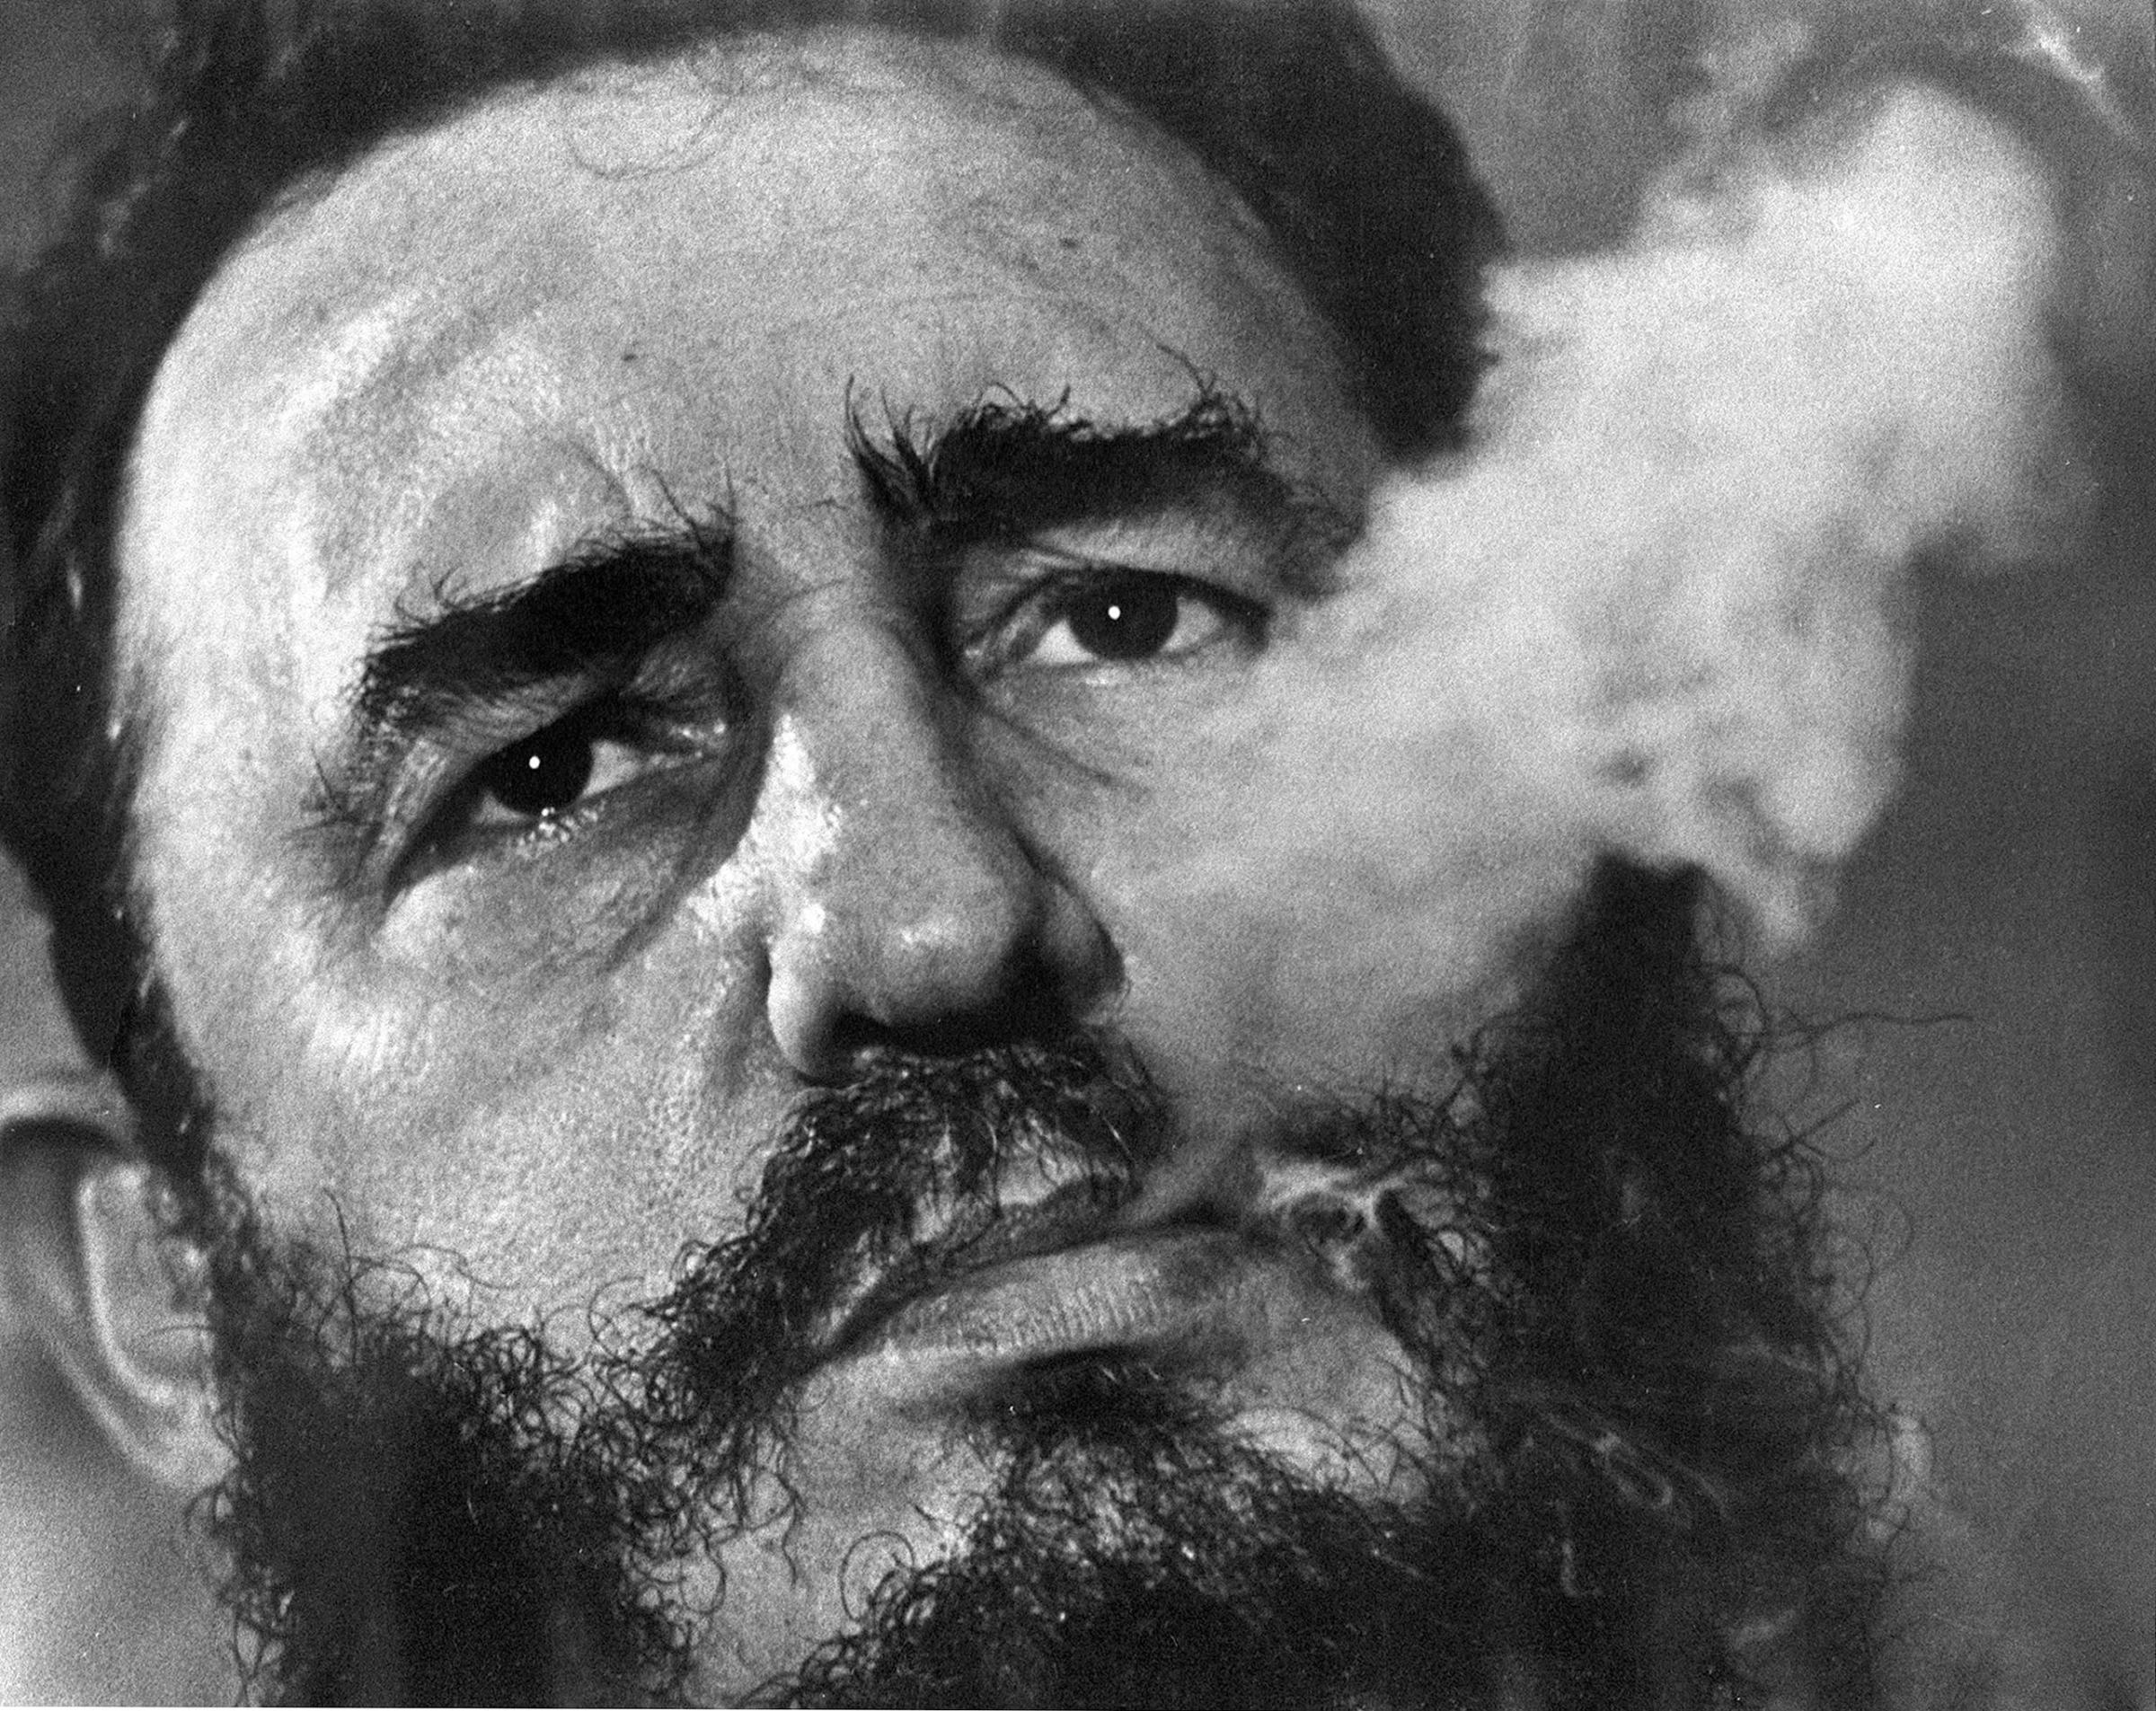 Fidel Castro exhales cigar smoke during an interview at his presidential palace in Havana, March 1985.